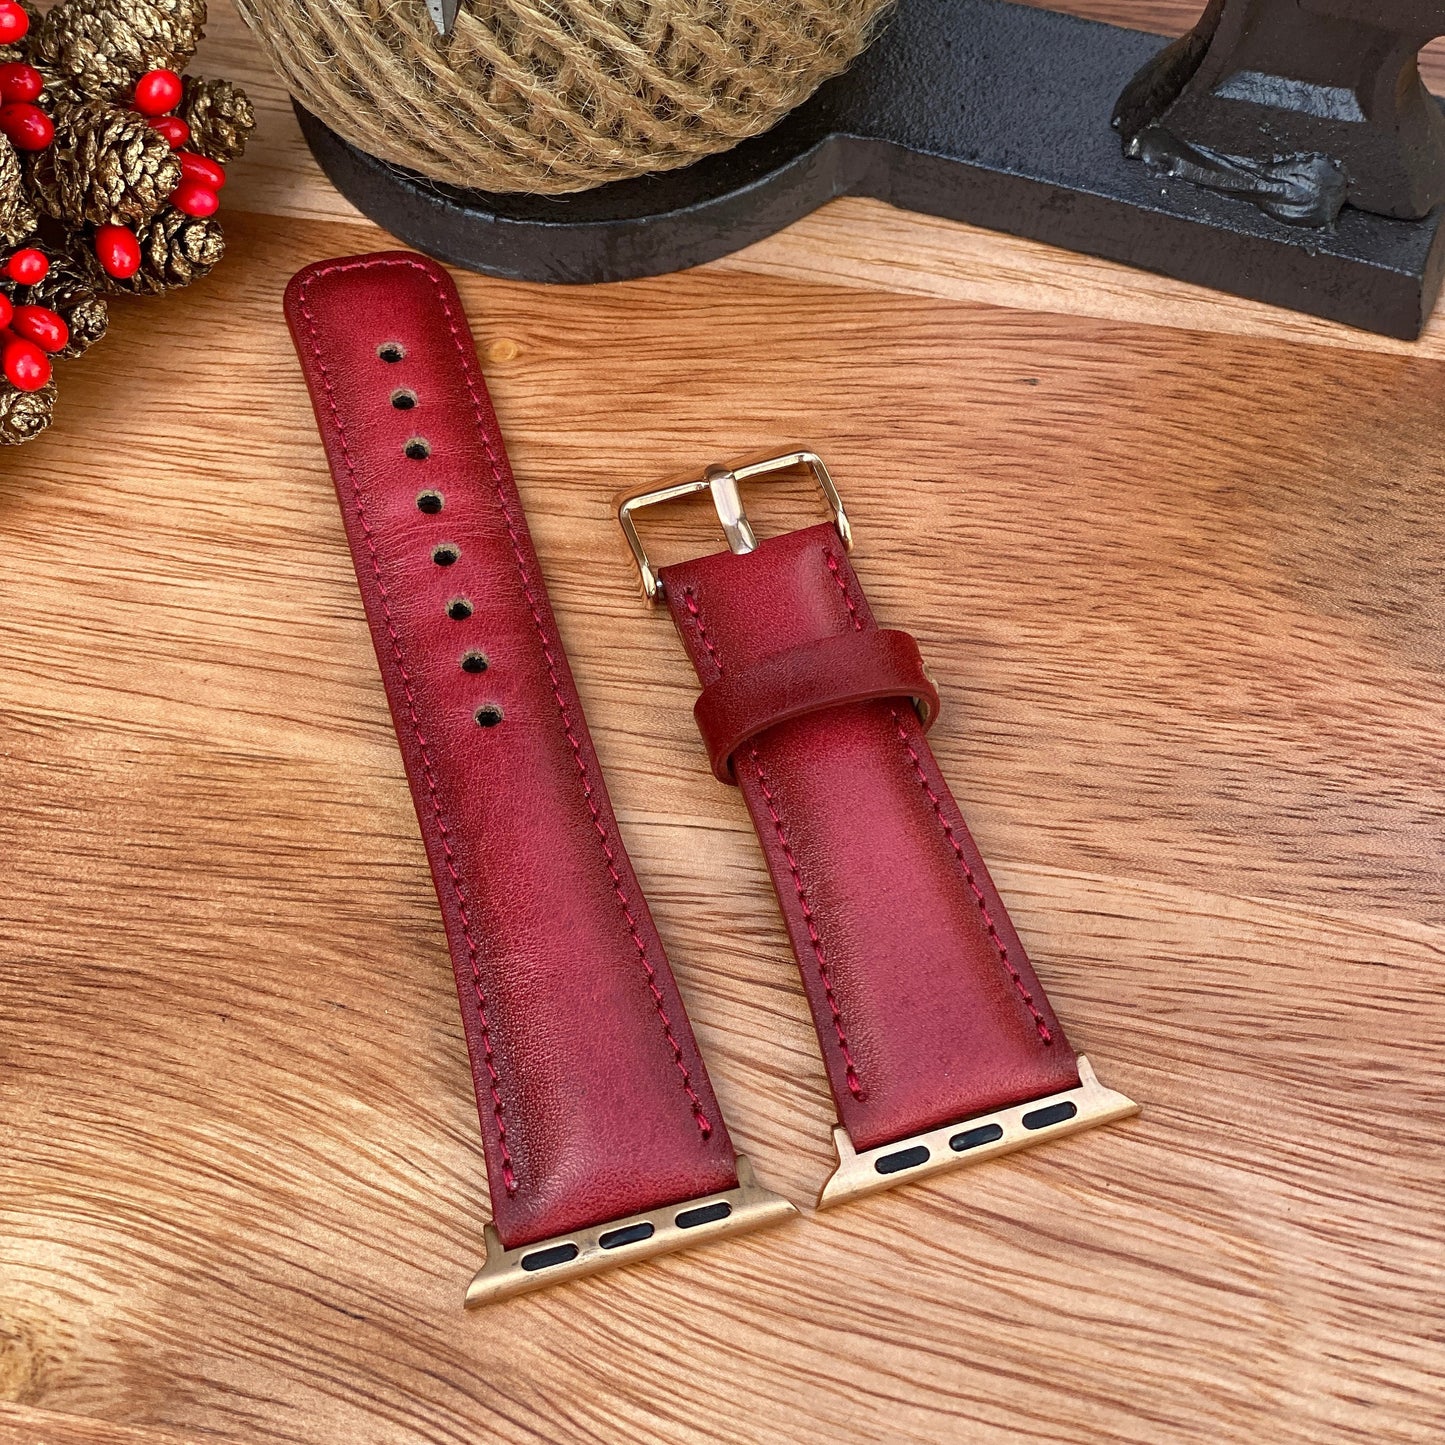 Red Genuine Leather Apple Watch Band 42mm, 38mm, 40mm, 44mm for Series 1-2-3-4-5-6, Red Band for iWatch Series 6-5-4-3-2-1